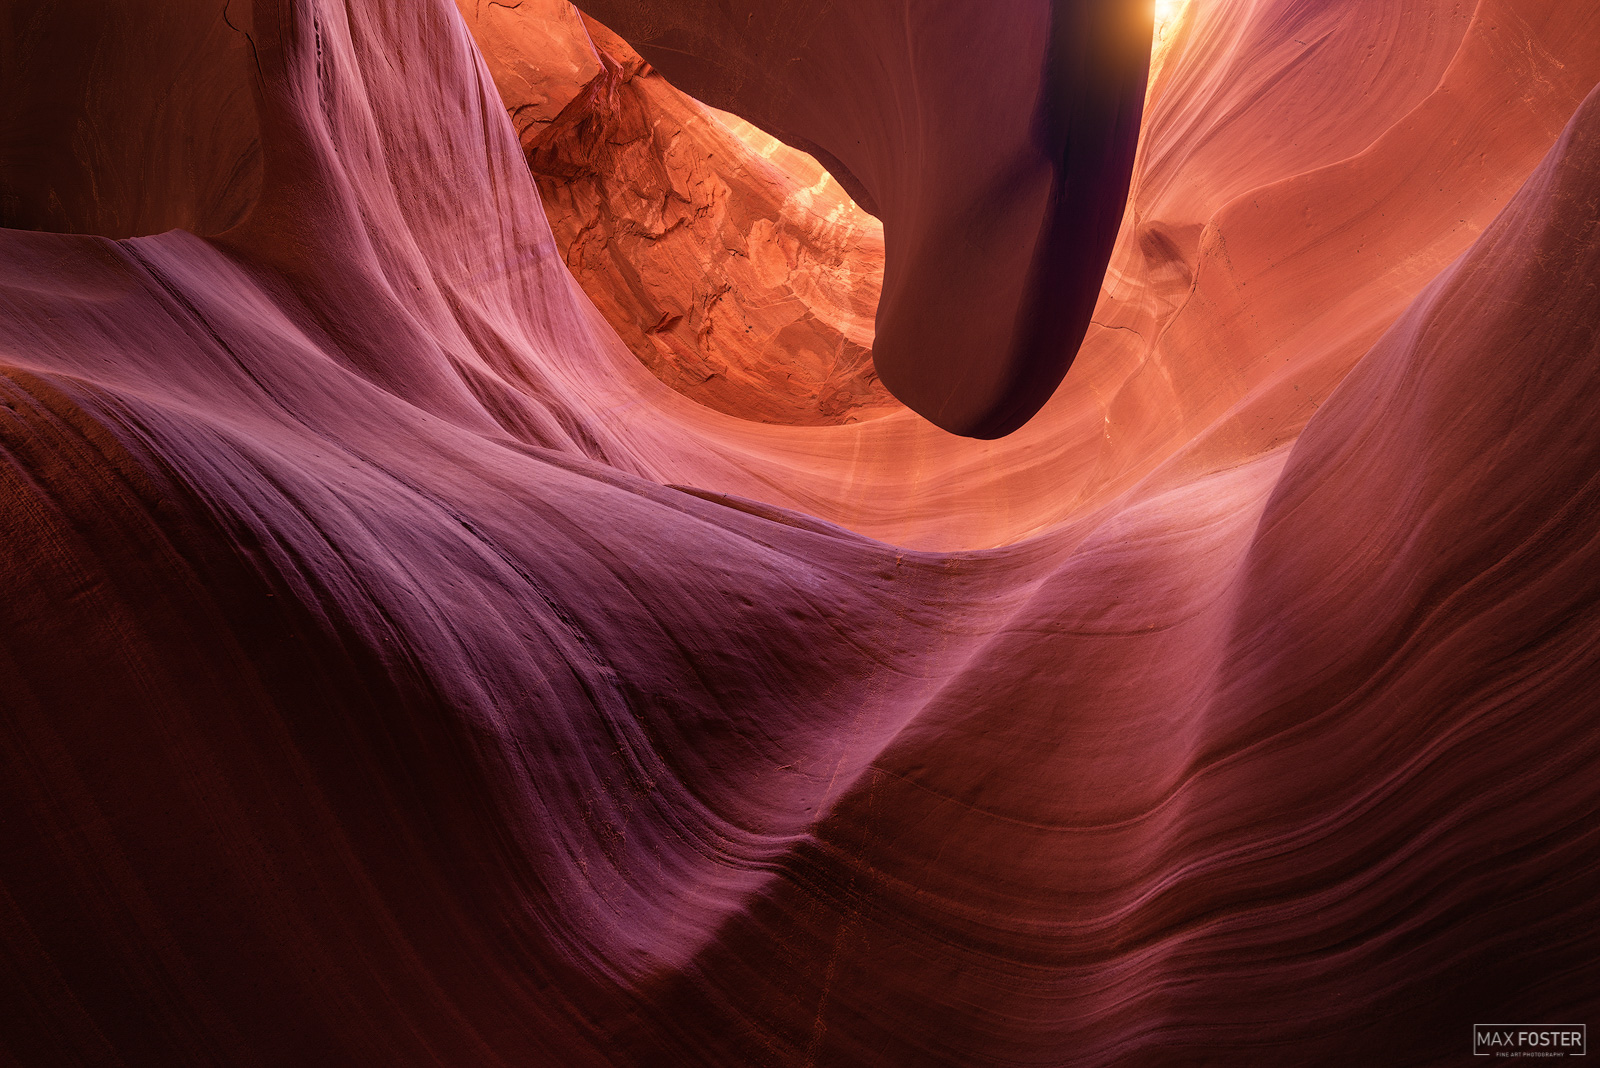 Bring your walls to life with Ablaze, Max Foster's limited edition photography print of a slot canyon in Page, Arizona from his...